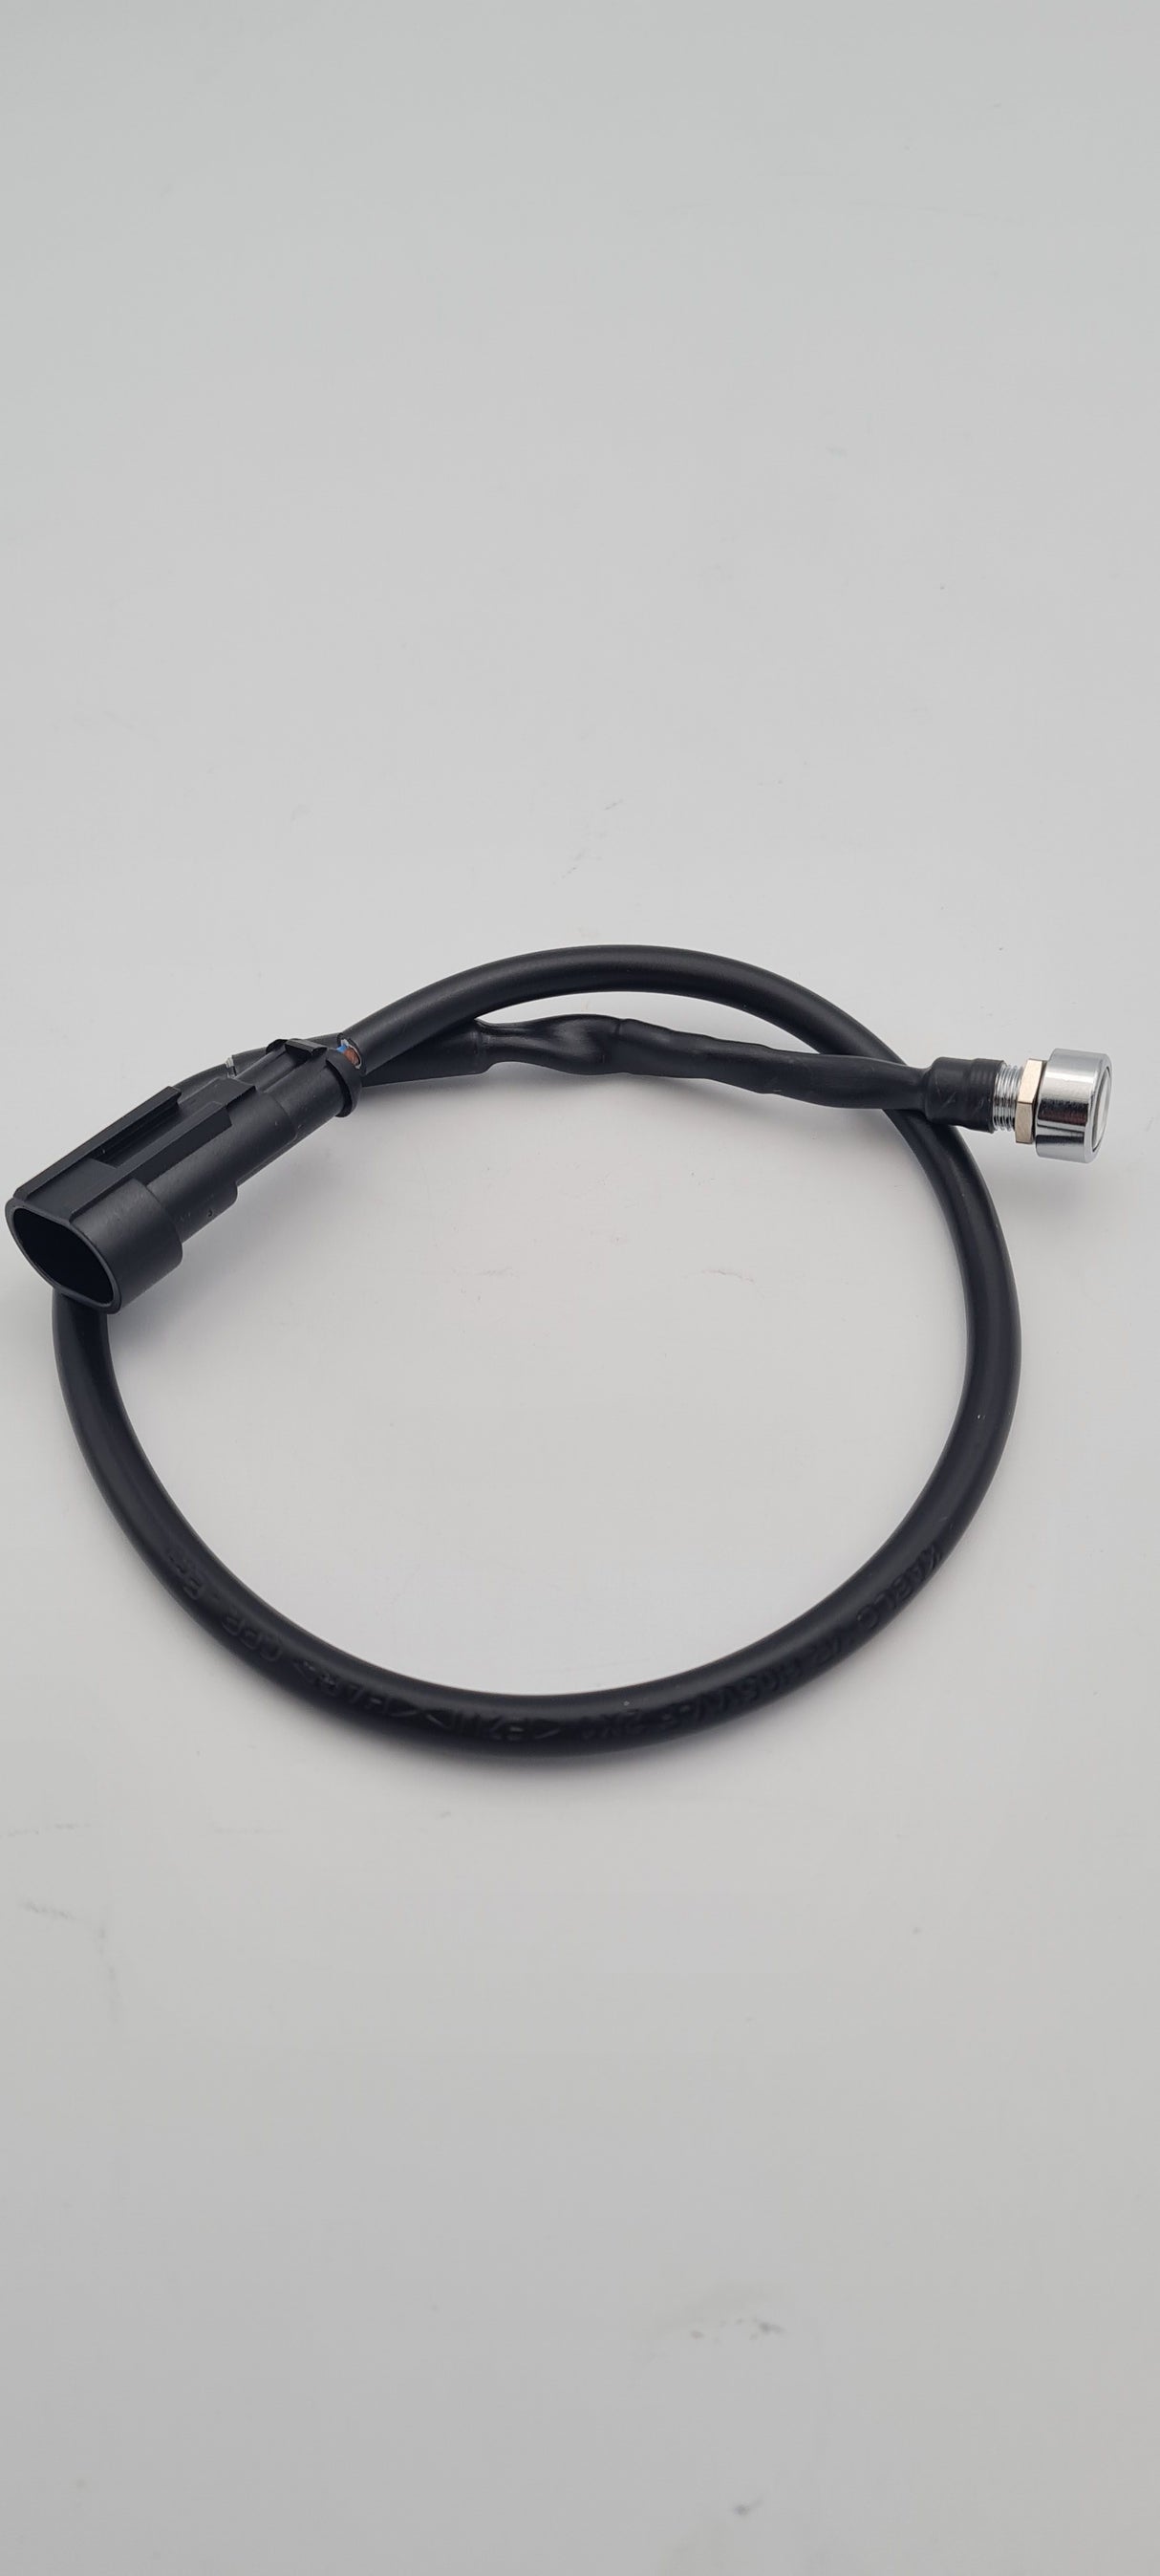 ALKO ATC Indicator Warning LED Diode Cable - Female Connector Model - 1239109